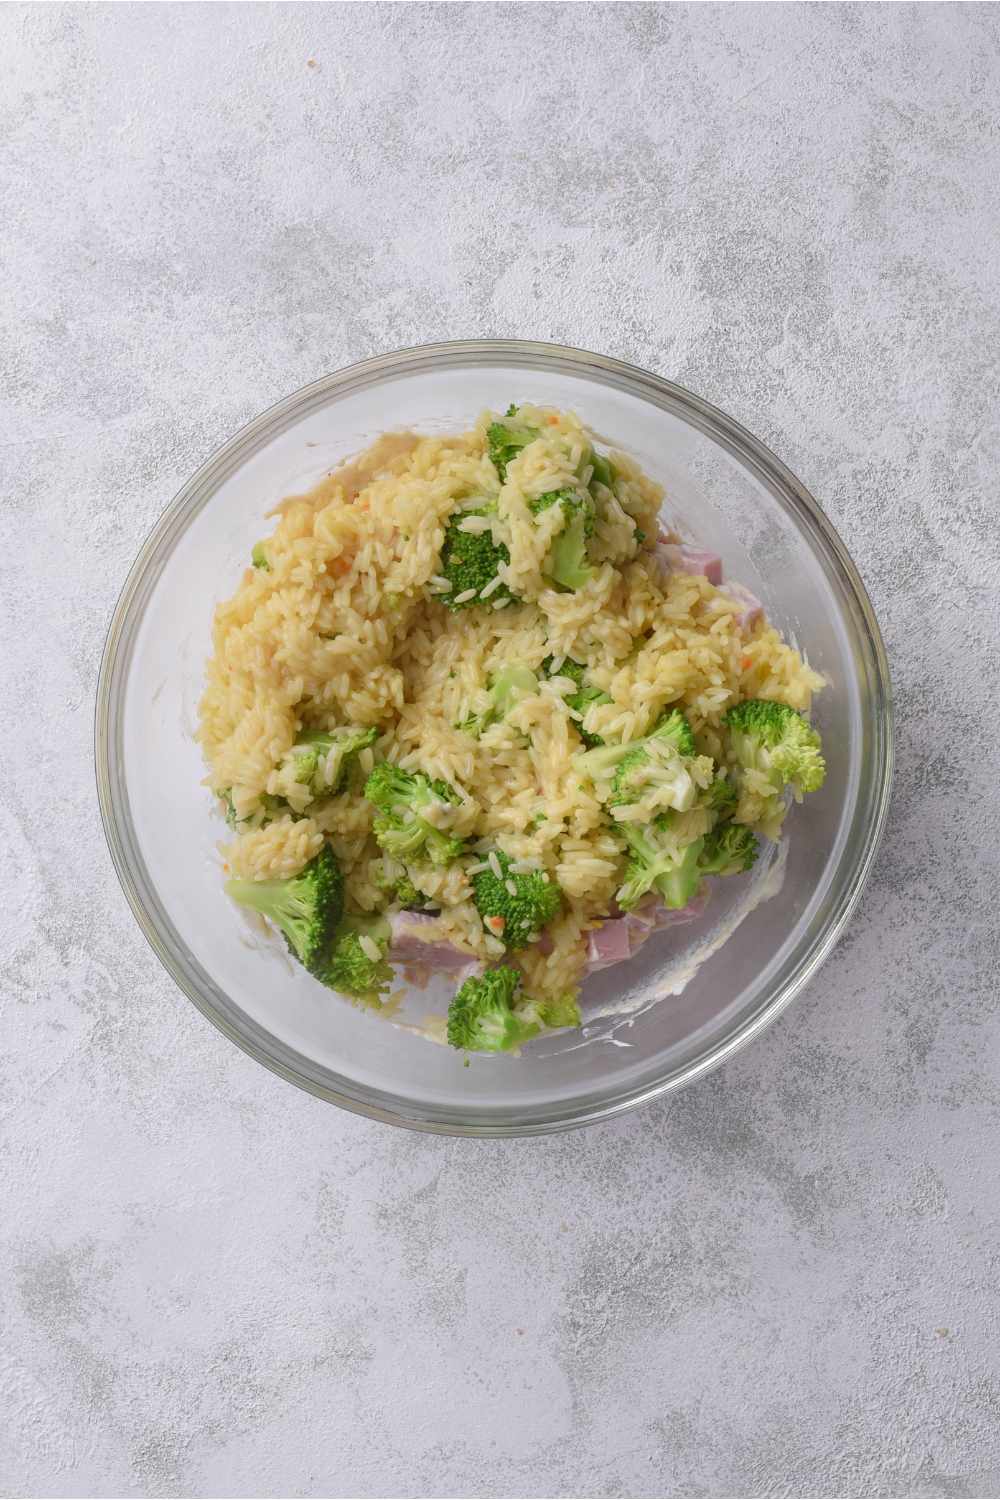 A bowl filled with cooked rice, cooked broccoli, and ham.